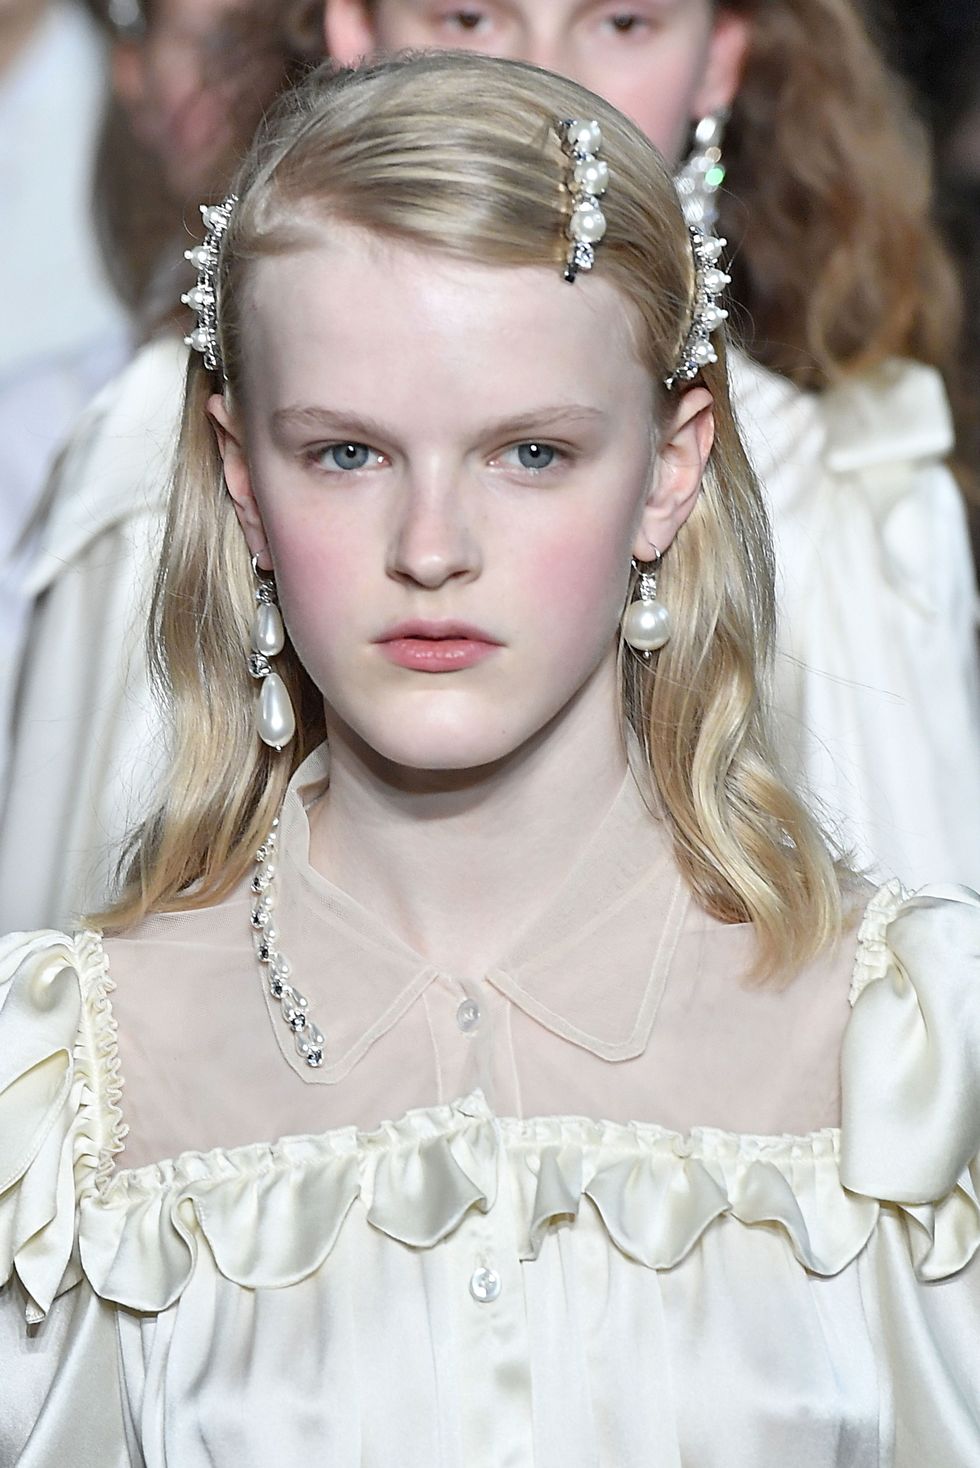 <p>And like the previous slide but more extra, this look takes a three-prong approach to defining and bringing light to&nbsp;the face: one pearl barrette at the arch, and two more at the ends of the brows. Add blush, and <a href="http://www.marieclaire.com/beauty/news/a13883/skin-perfecting-techniques-art-history/" target="_blank" data-tracking-id="recirc-text-link">you're a lit-from-within Renaissance figure</a>.&nbsp;</p>